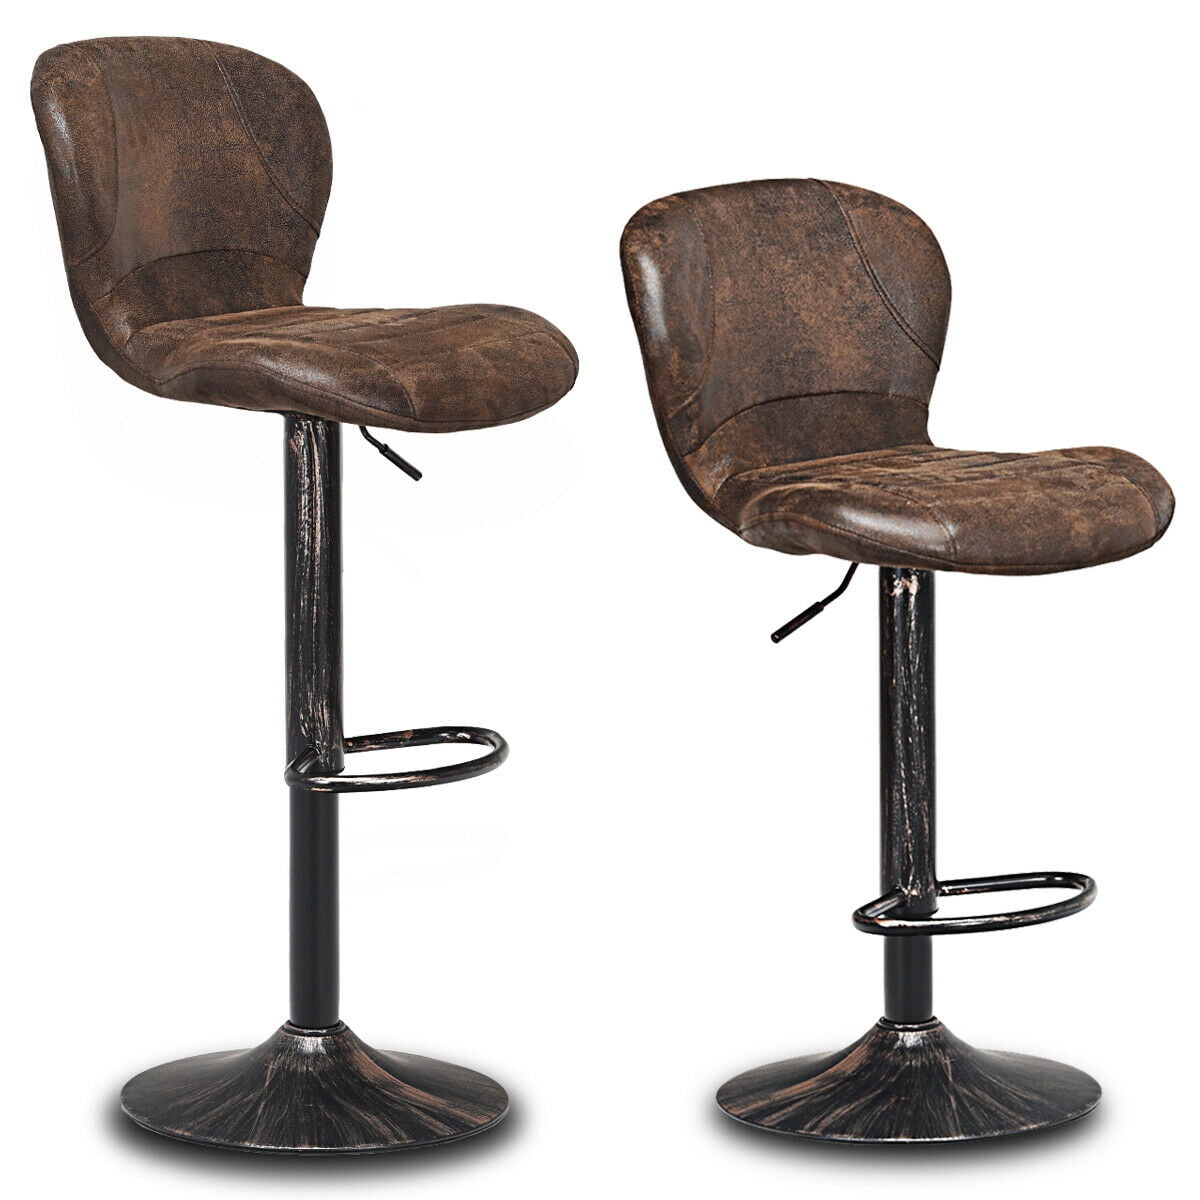 Set of 2 Bar Stool Century Vintage Brown Bar Chairs with Footrest Height Stools 